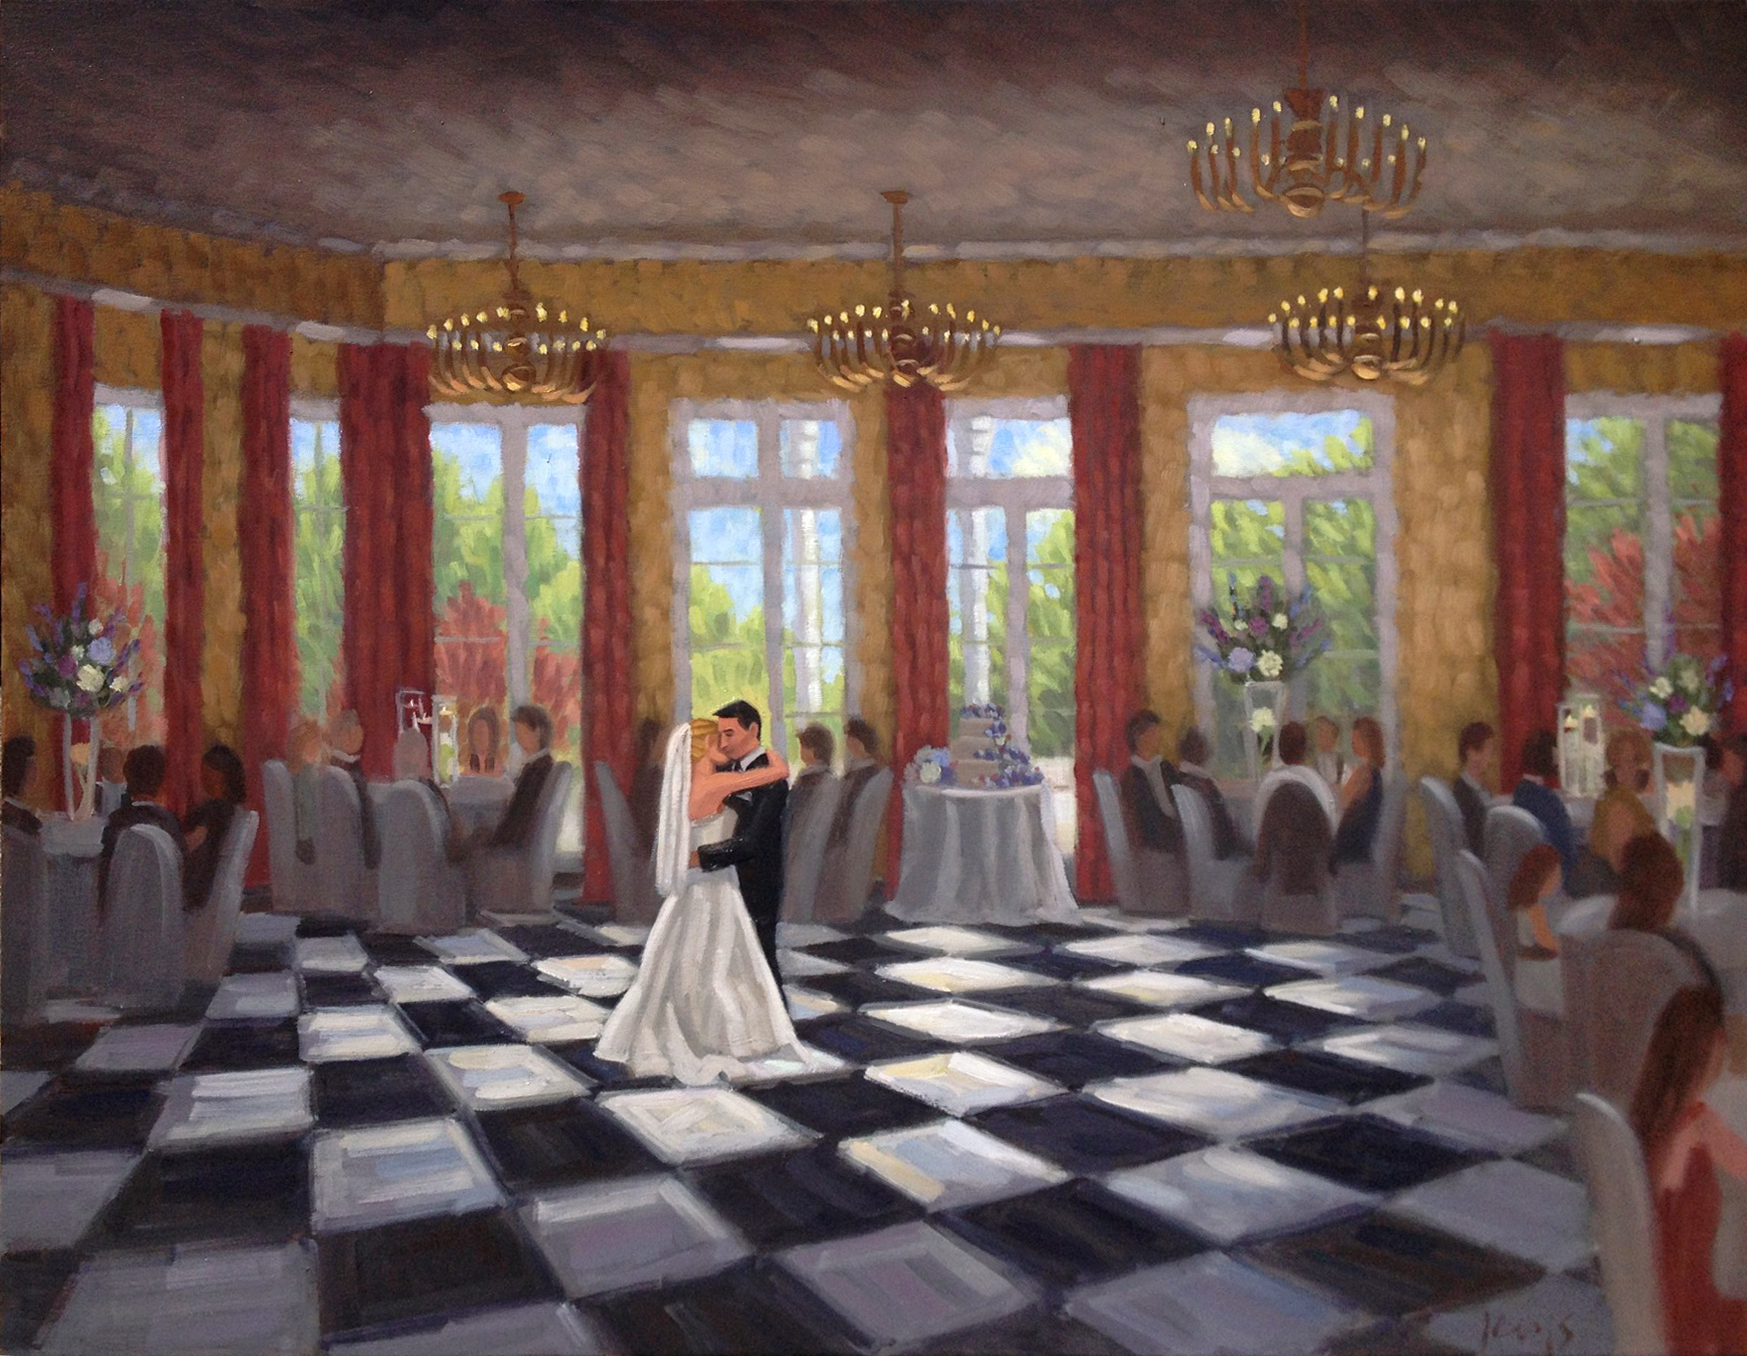 Live Wedding Painting South Carolina Country ClubBen Keys, Wed on Canvas Live Wedding Artist